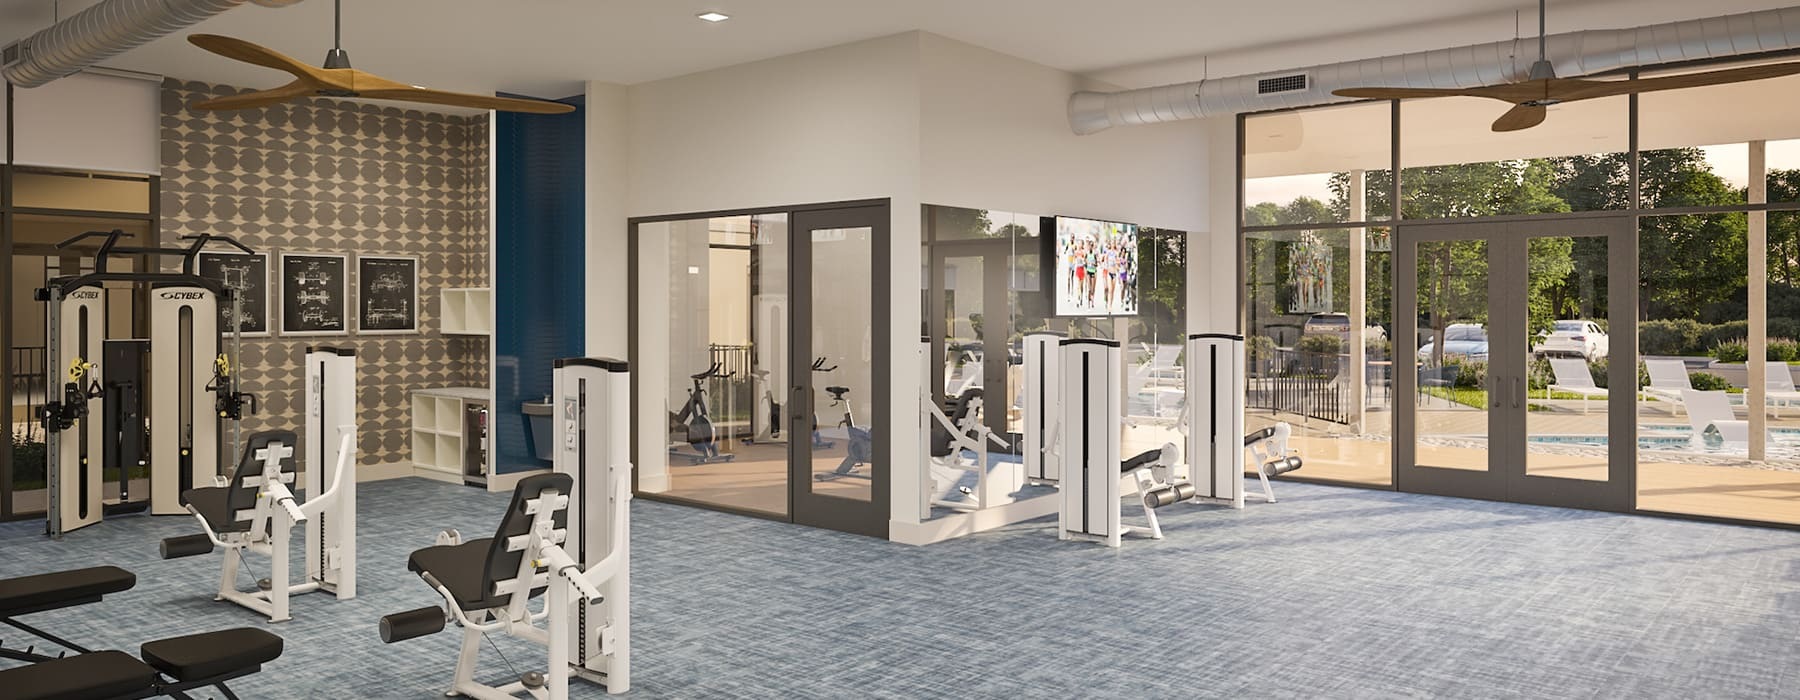 rendering of fitness center showing spacious room and equipment